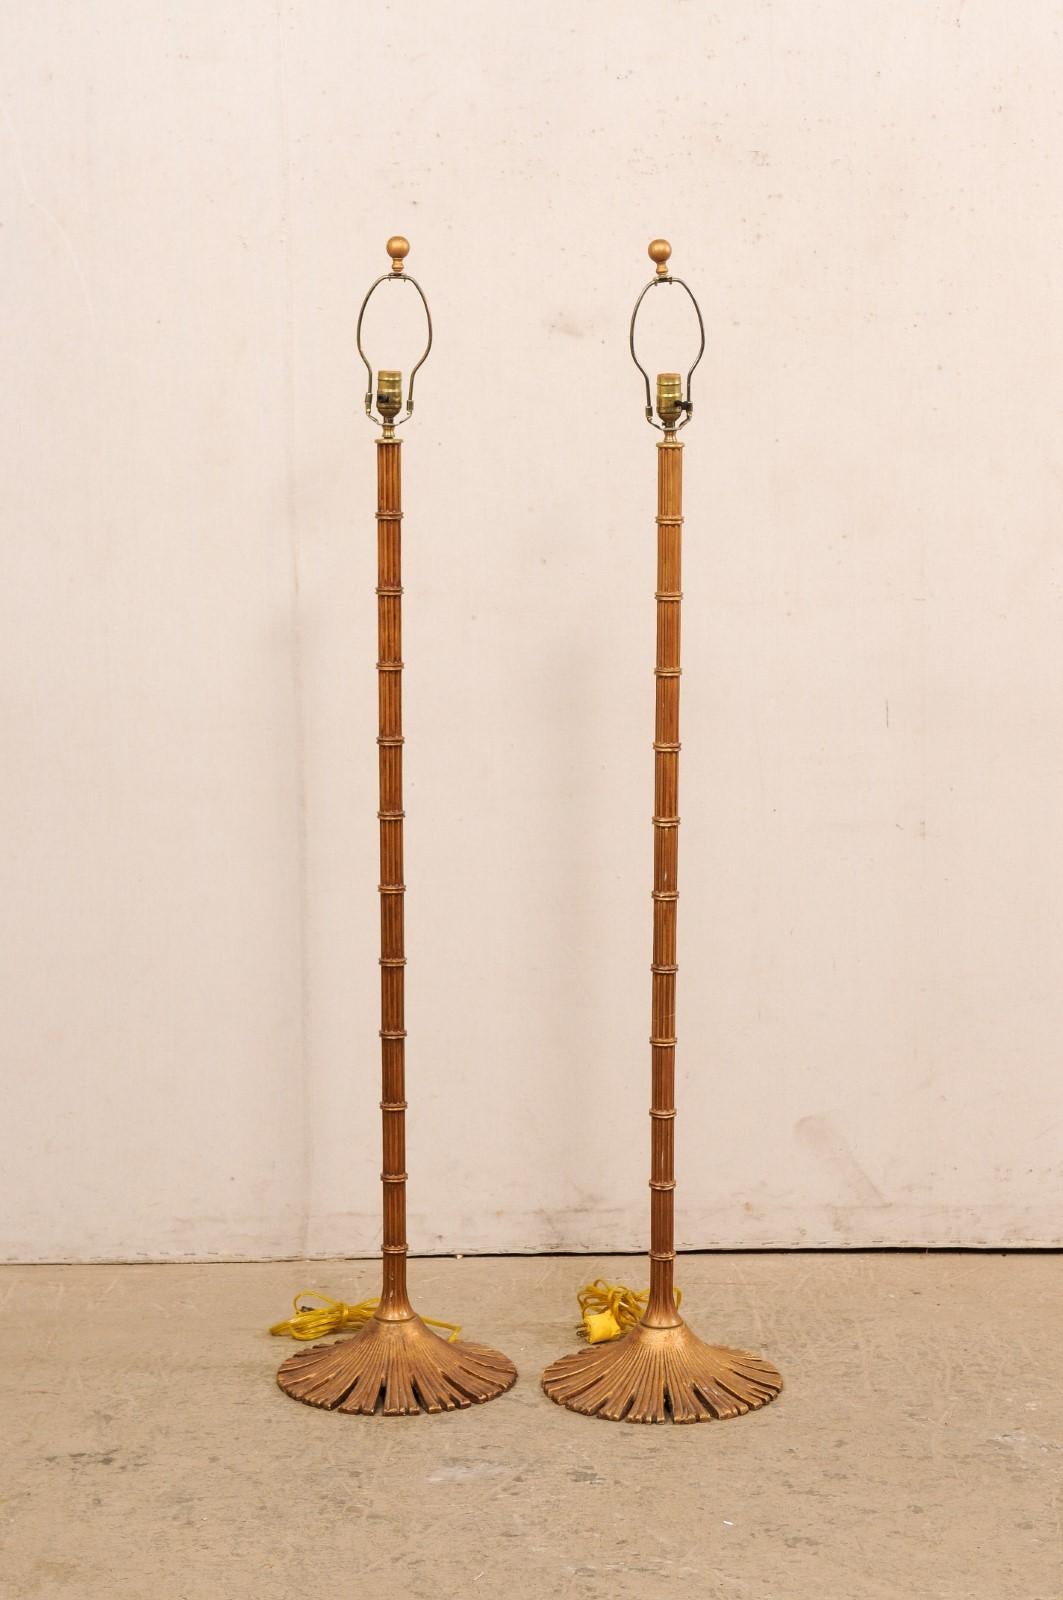 A pair of brass floor lamps from American company Chapman Manufacturing Company. This vintage pair of brass floor lamps have a beautifully reed-style bamboo designed column, with rounded base in a splayed out a lovely pattern reminiscent of a flower